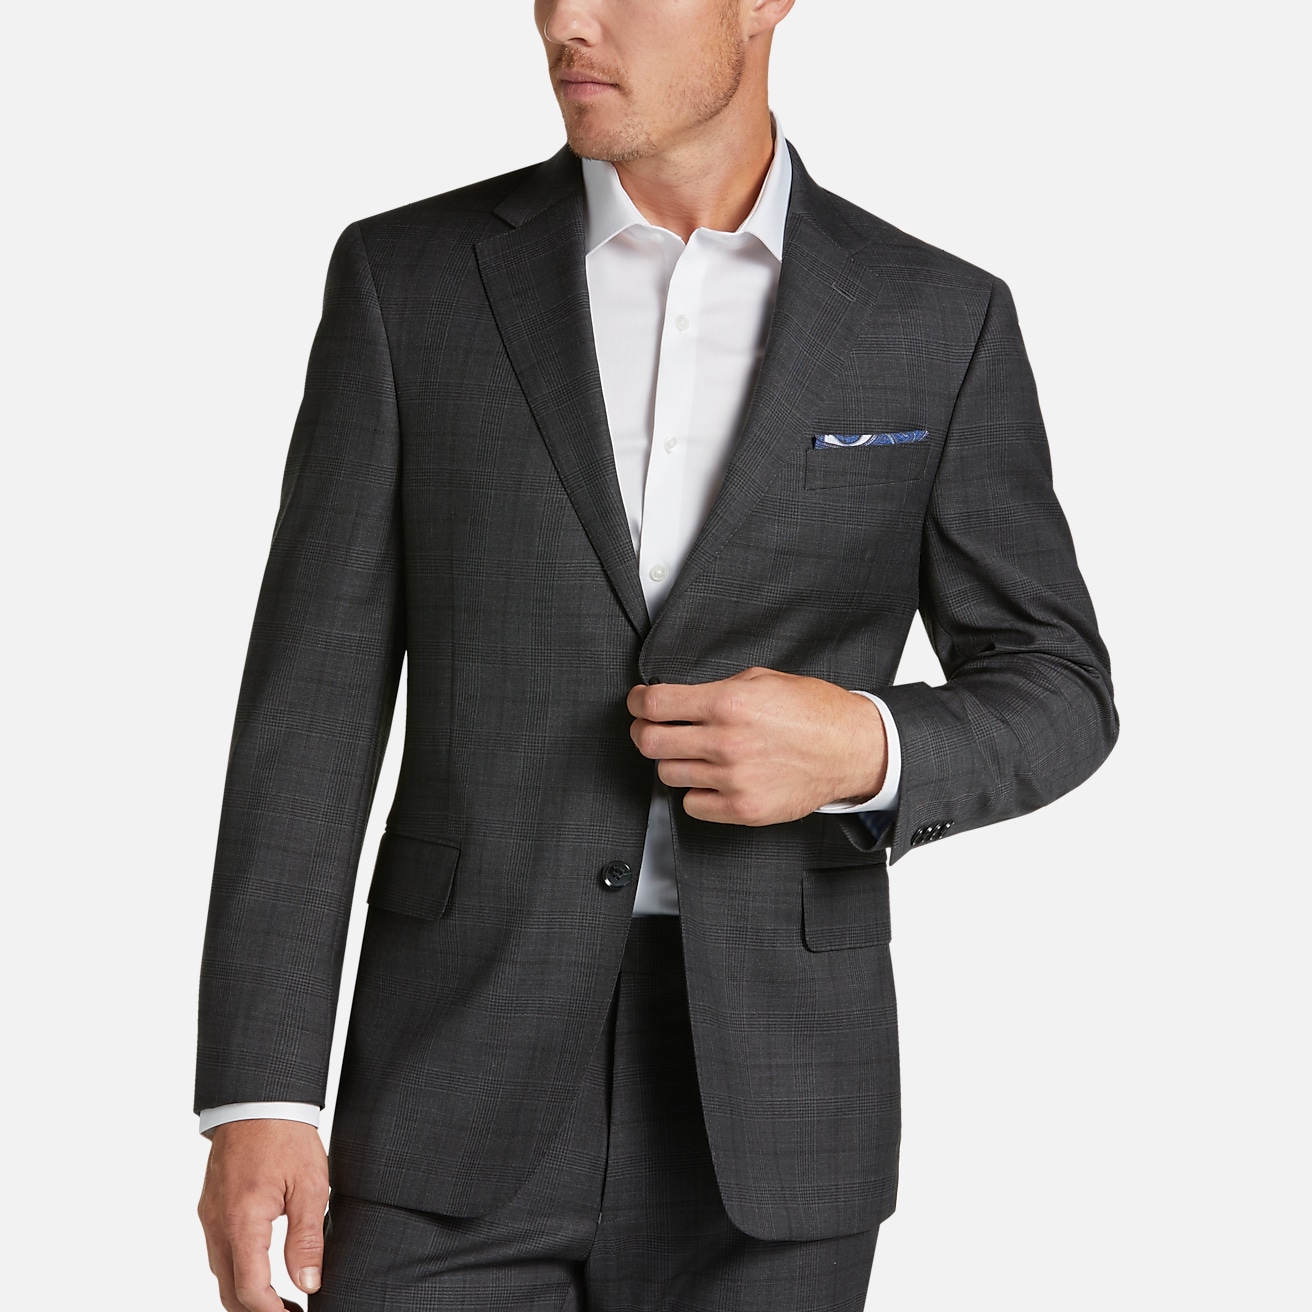 https://image.menswearhouse.com/is/image/TMW/TMW_3VNJ_66_TOMMY_HILFIGER_2_PIECE_SUITS_CHARCOAL_PLAID_MAIN?imPolicy=pdp-mob-2x